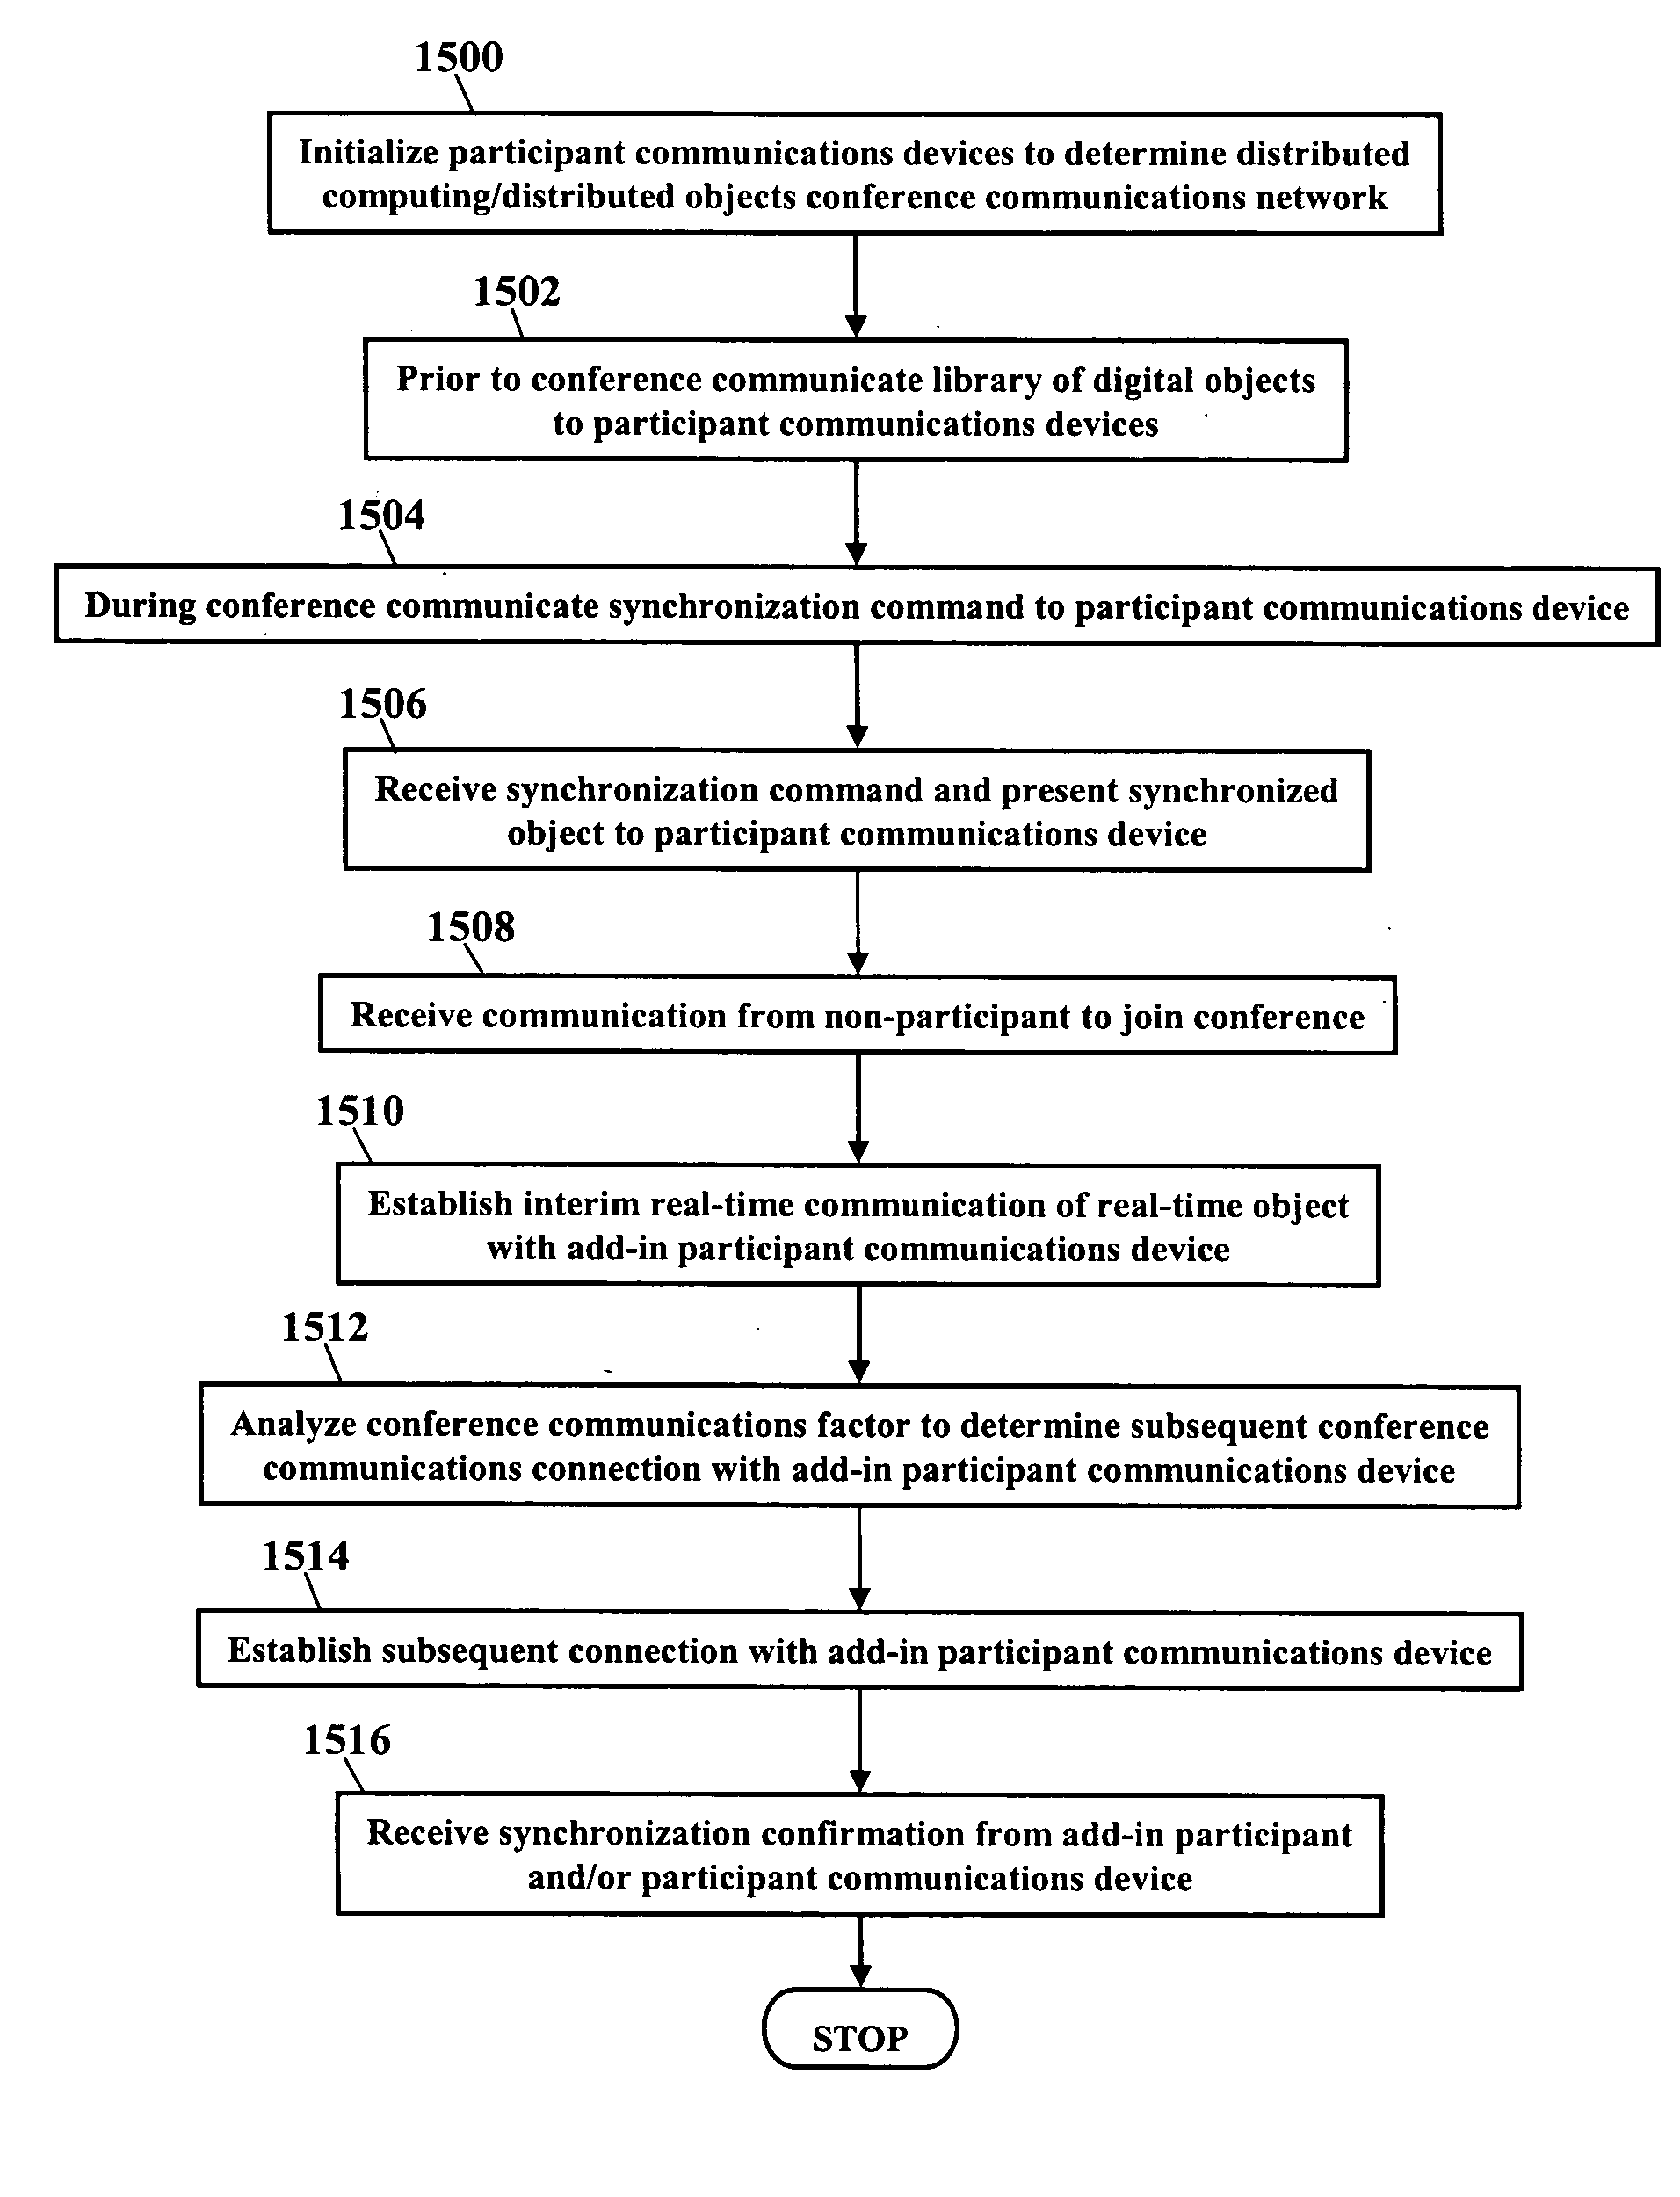 Network conferencing using method for concurrent real time broadcast and distributed computing and/or distributed objects